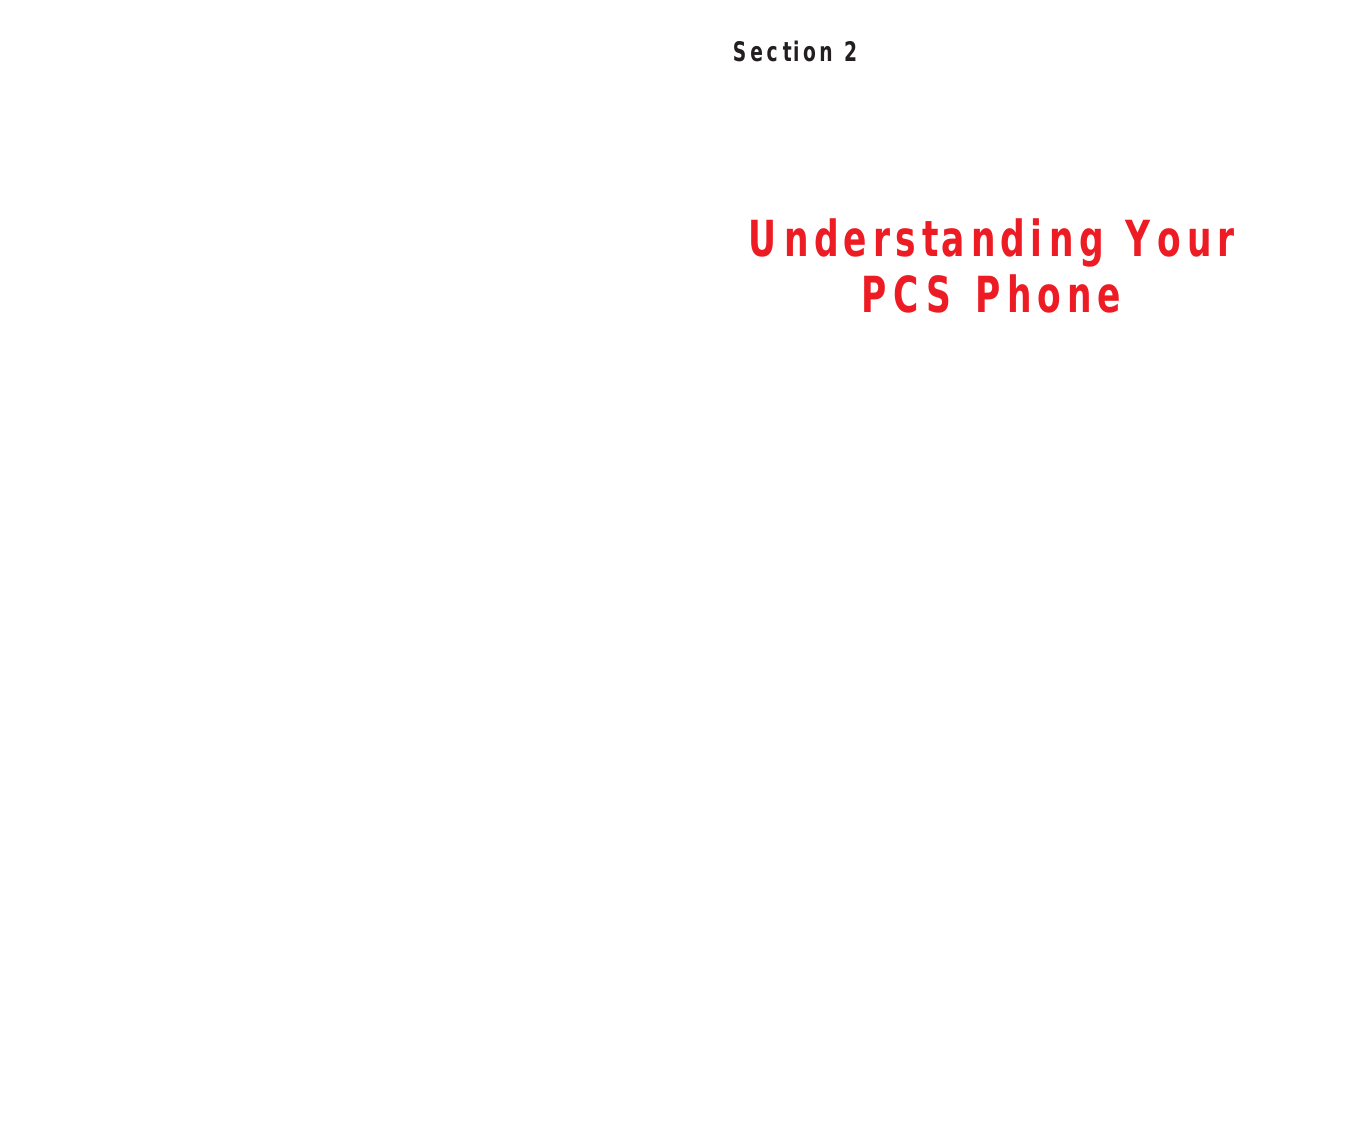  Section 2 Understanding Your PCS Phone